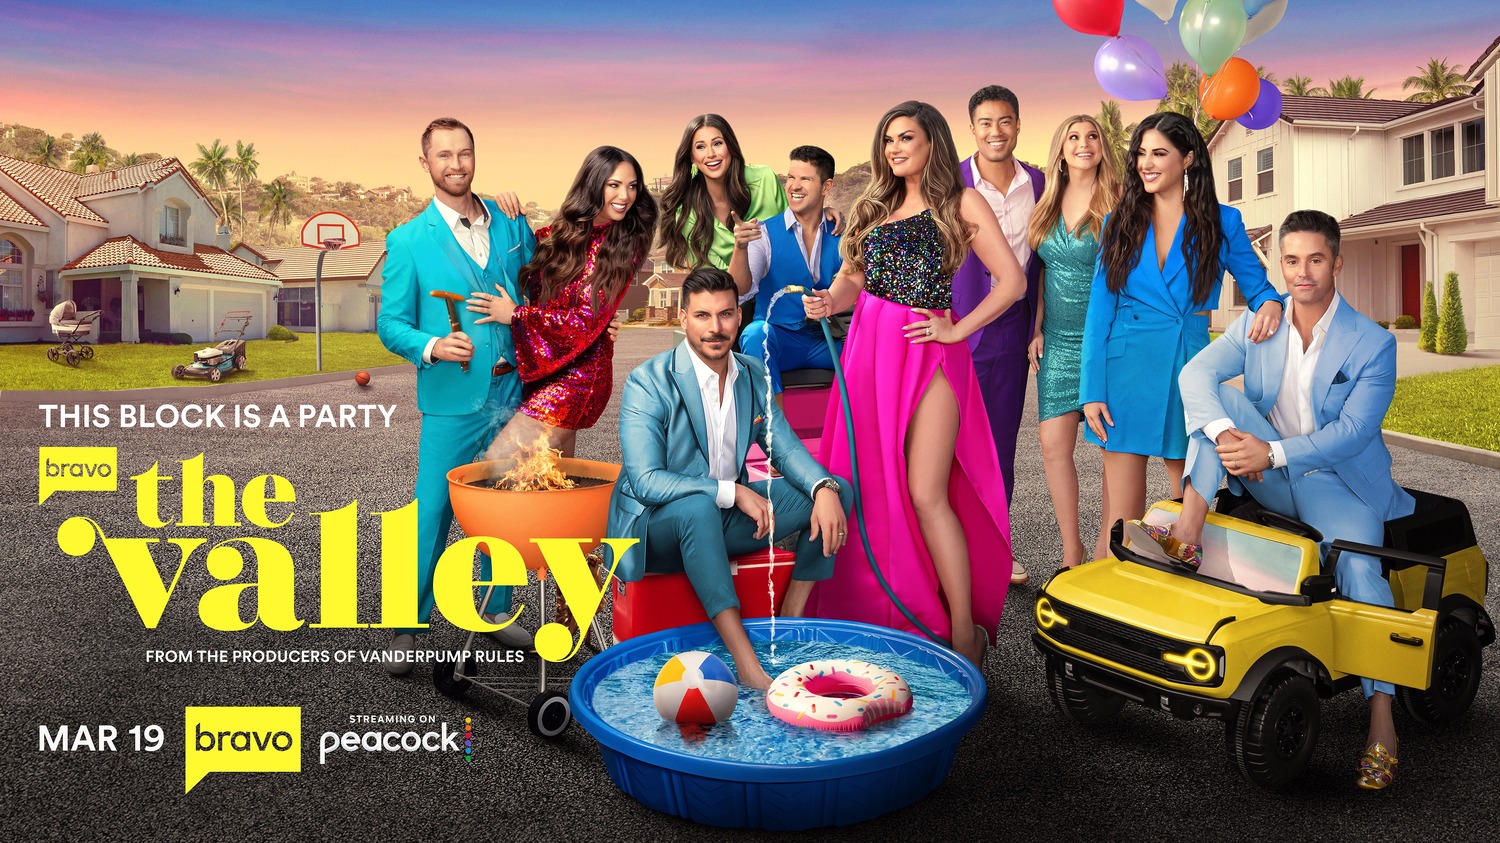 Extra Large TV Poster Image for The Valley (#2 of 2)